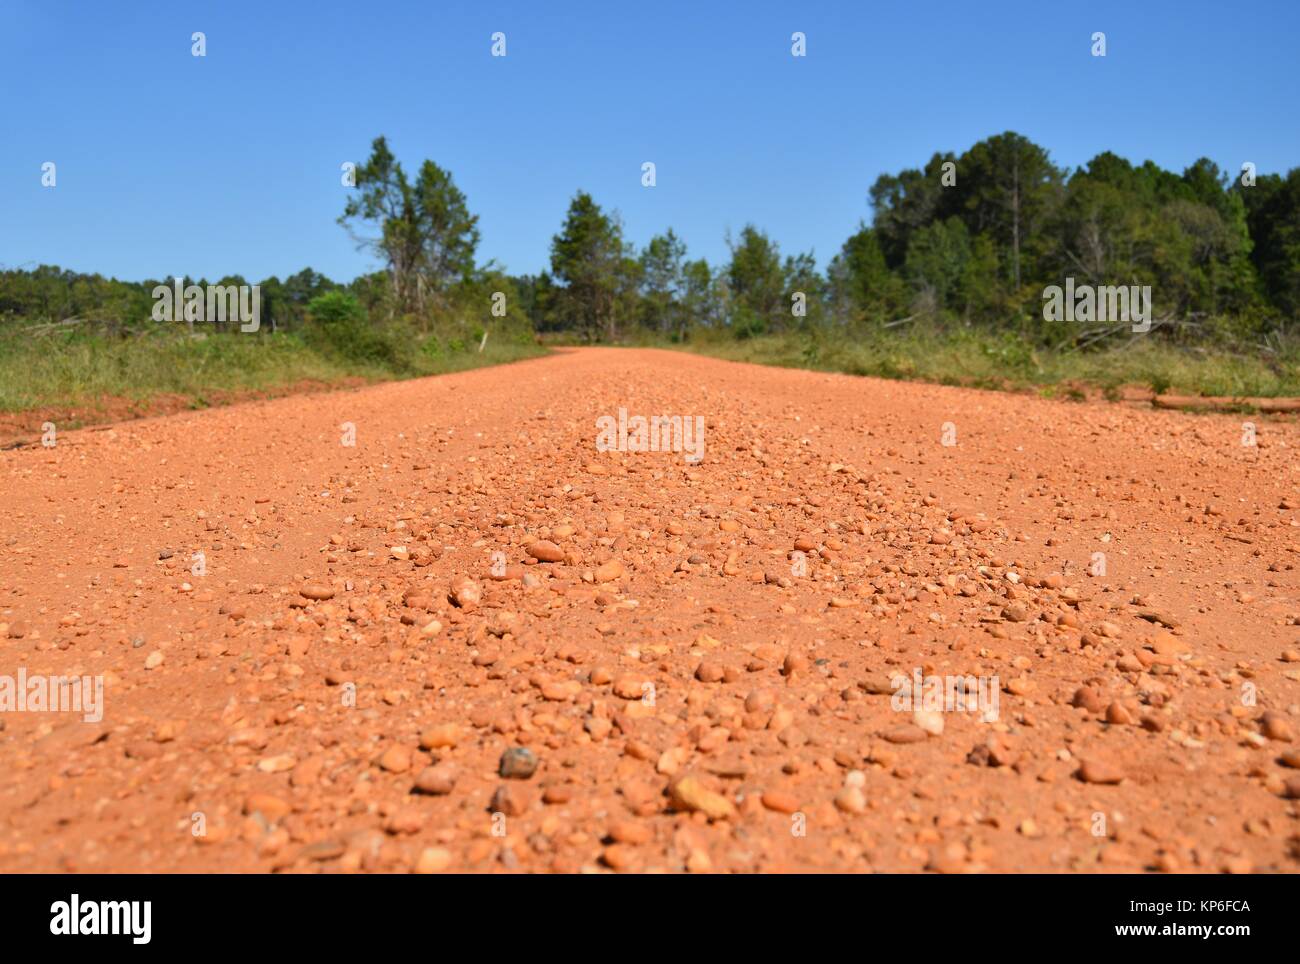 A generic red gravel road with no people under a bright blue sky in Alabama, USA Stock Photo